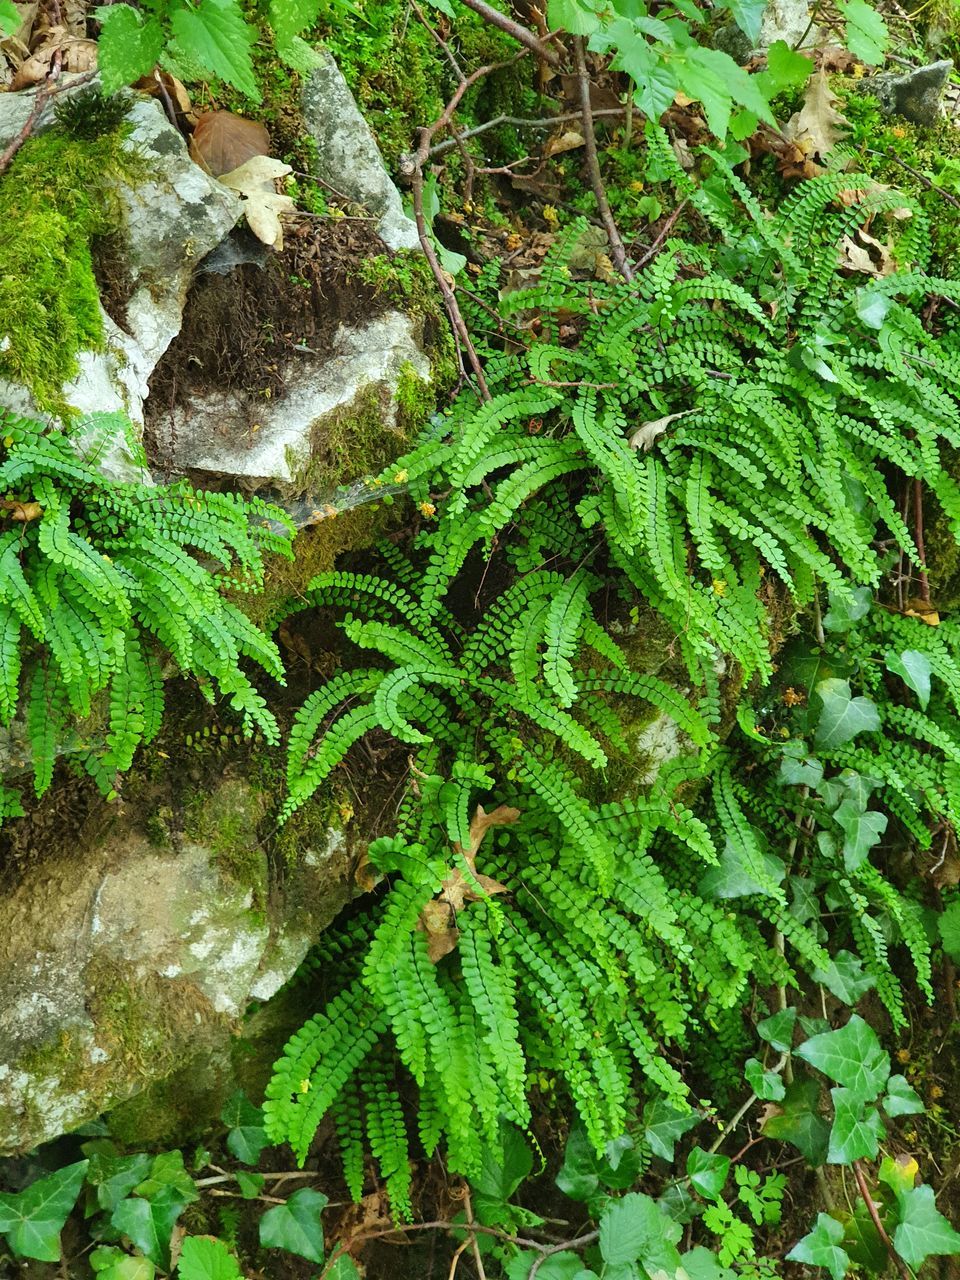 HIGH ANGLE VIEW OF FERN AND TREES IN FOREST